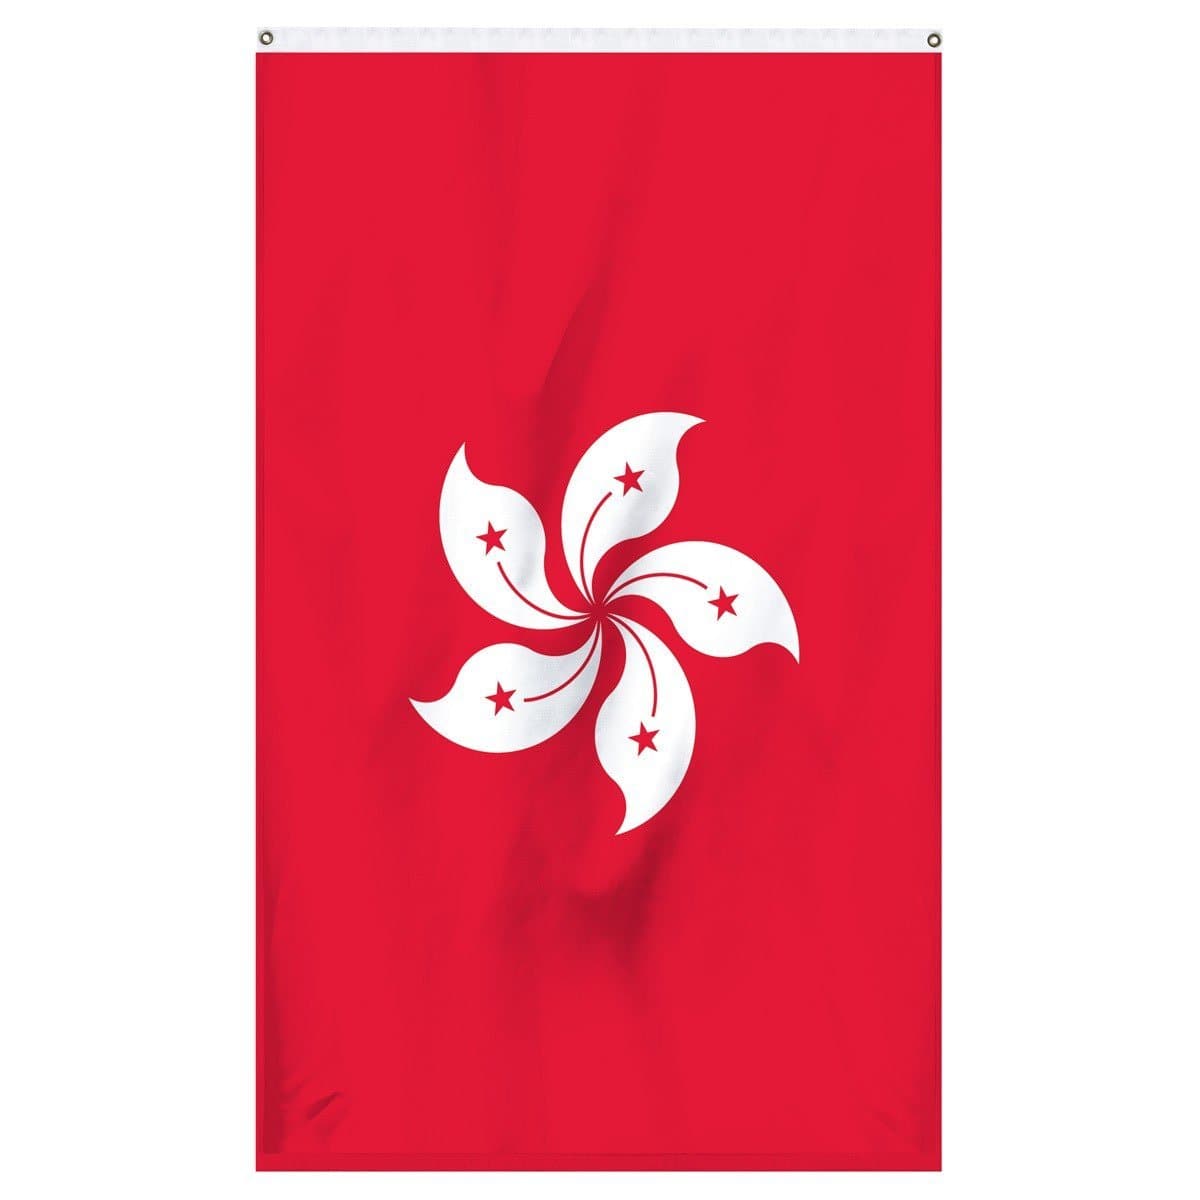 The flag of Hong Kong for sale online for flying on a flagpole or carrying in a parade